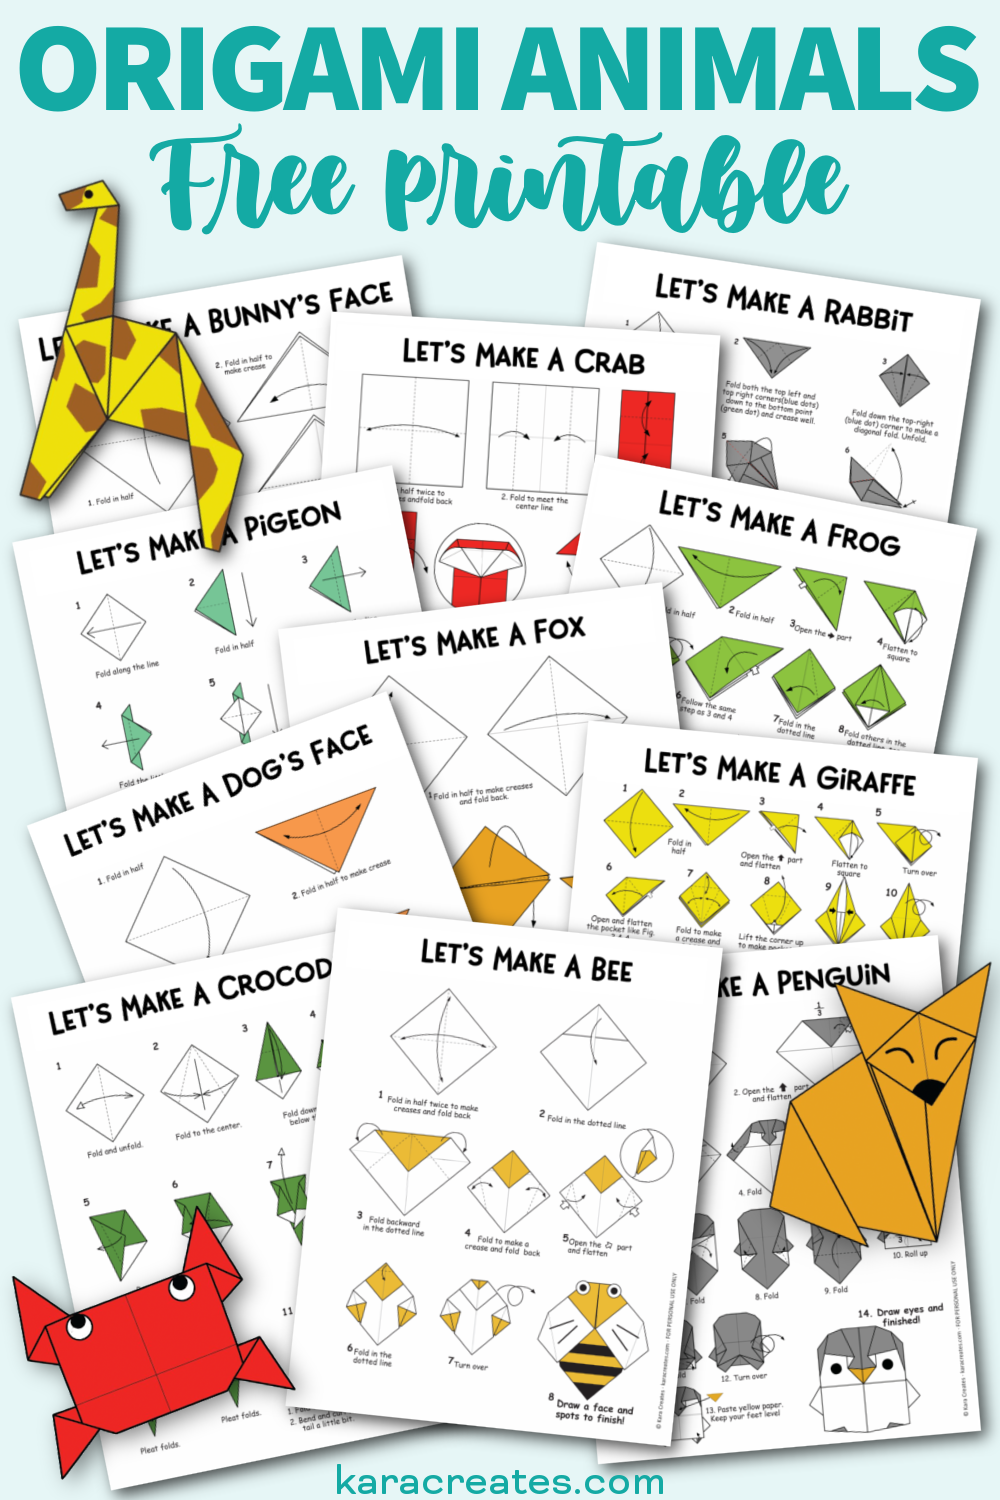 Free Origami Animals with Instructions and Diagrams - Kara Creates